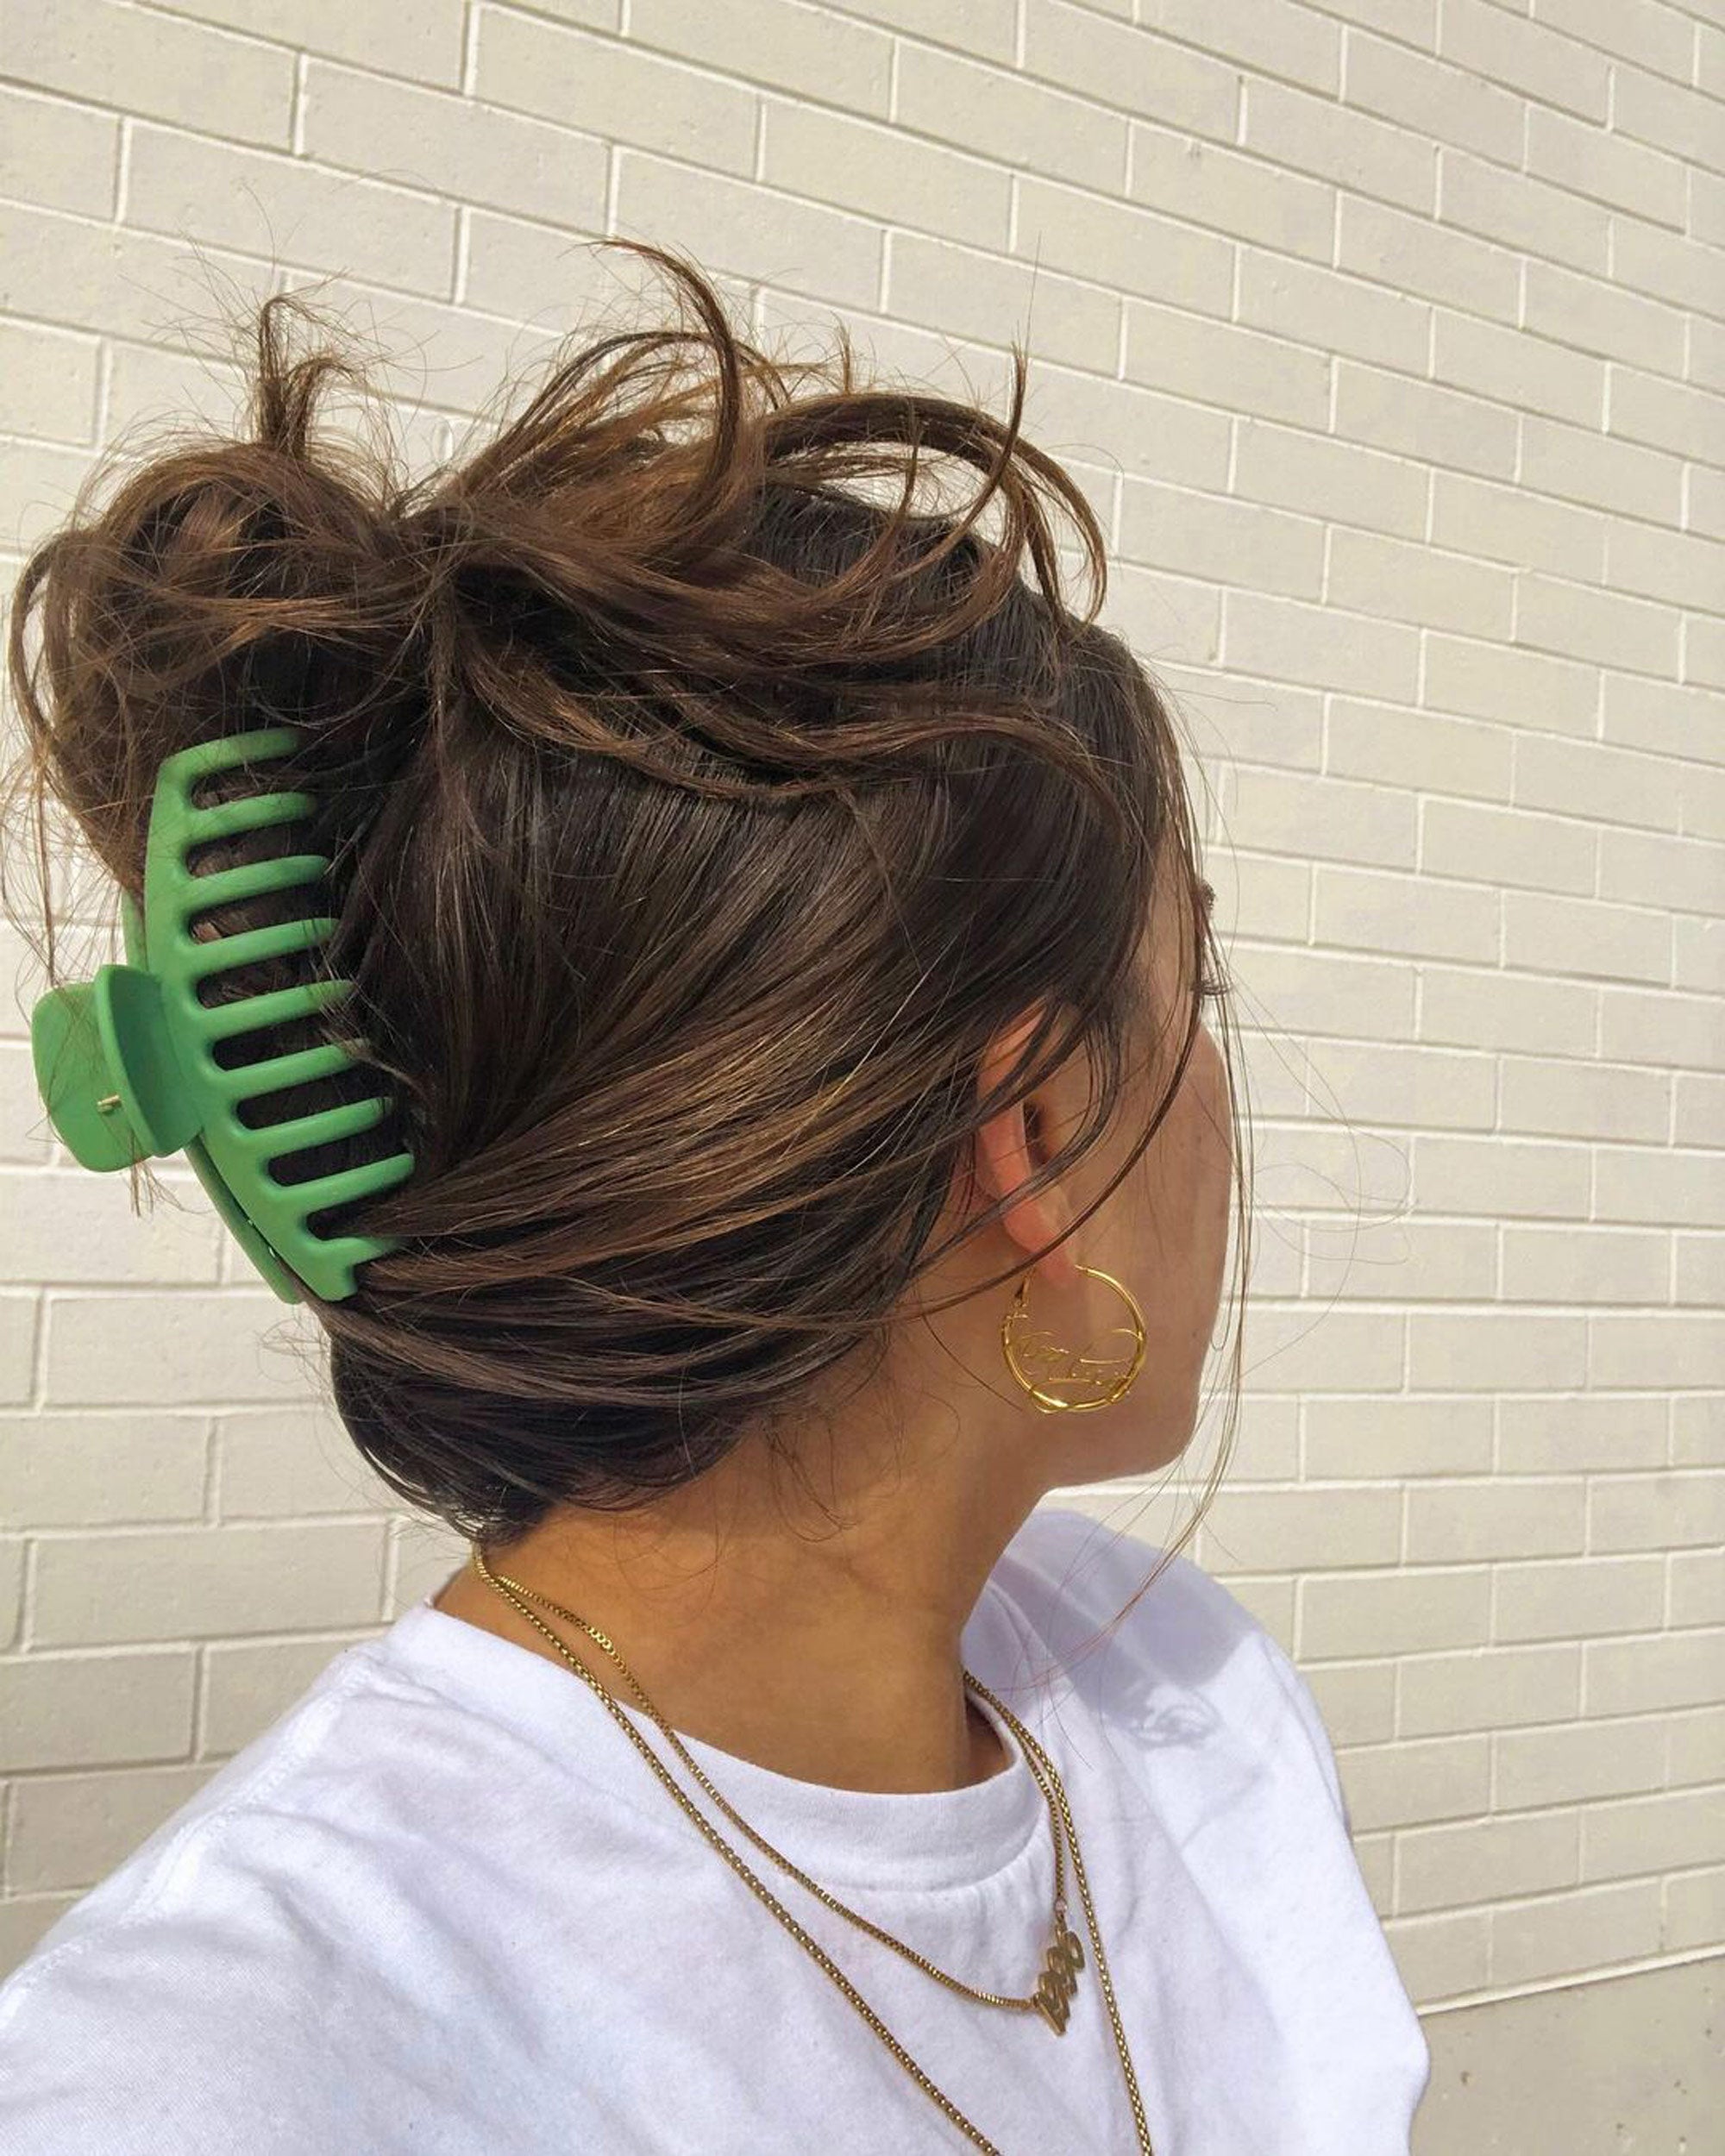 10 Banana Clip Hairstyles to Rock in 2023